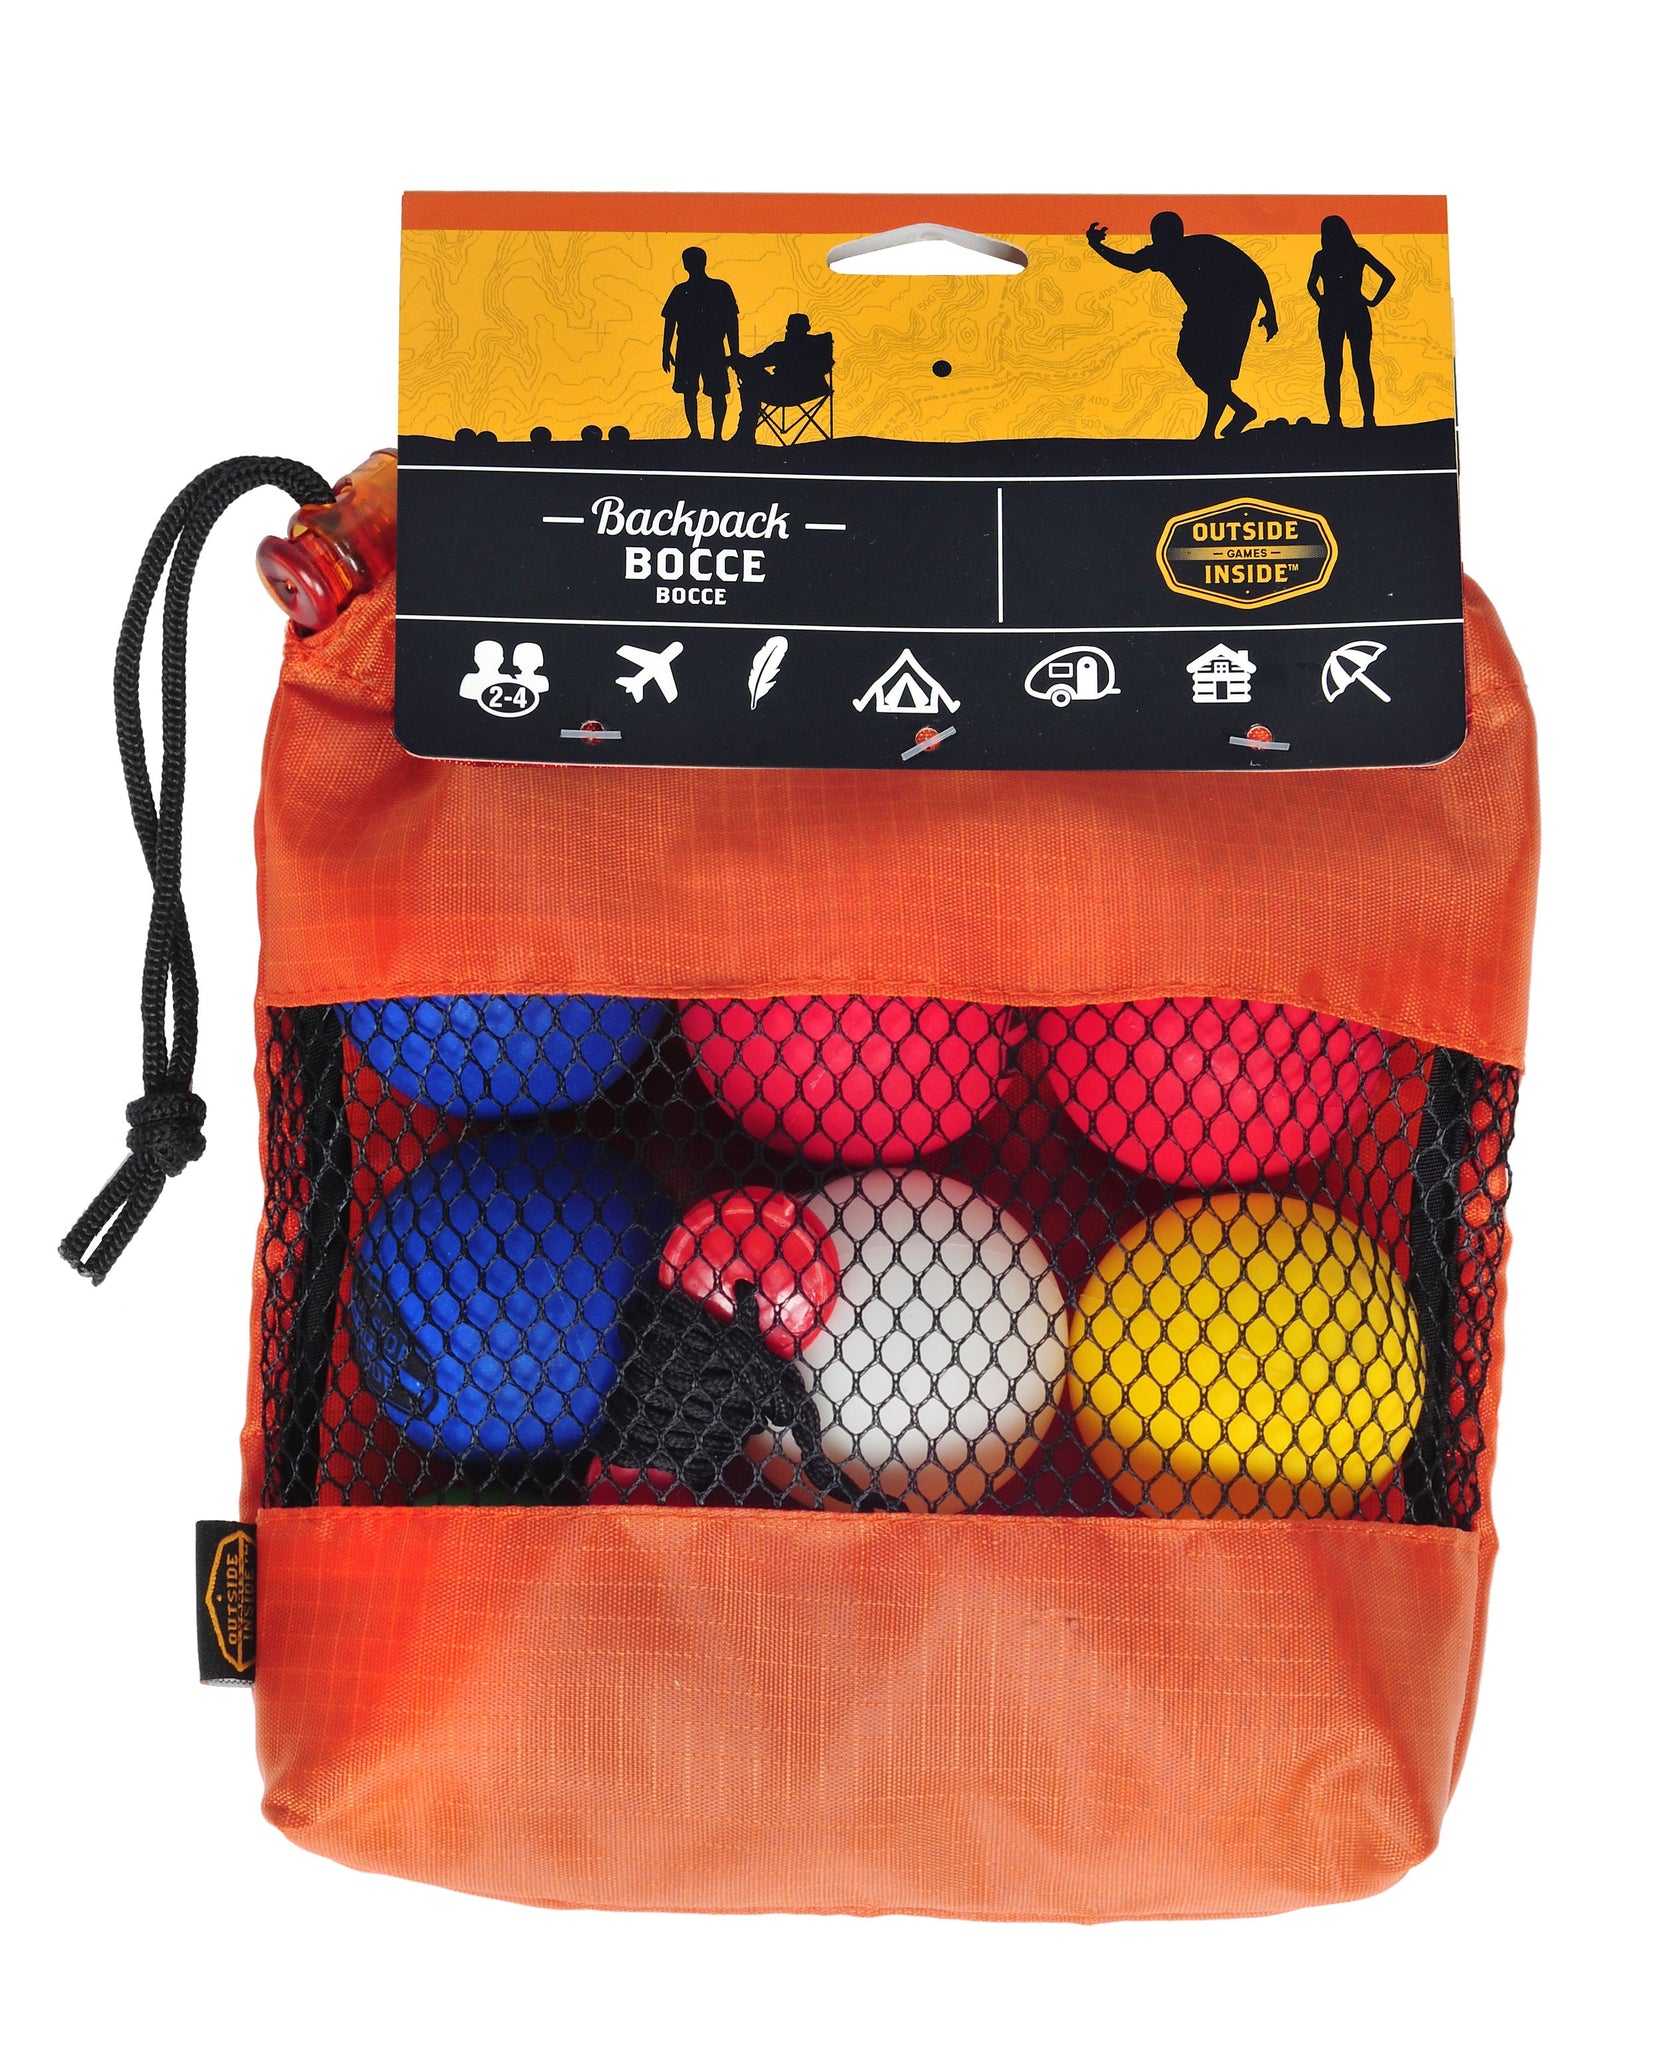 BACKPACK BOCCE BALL